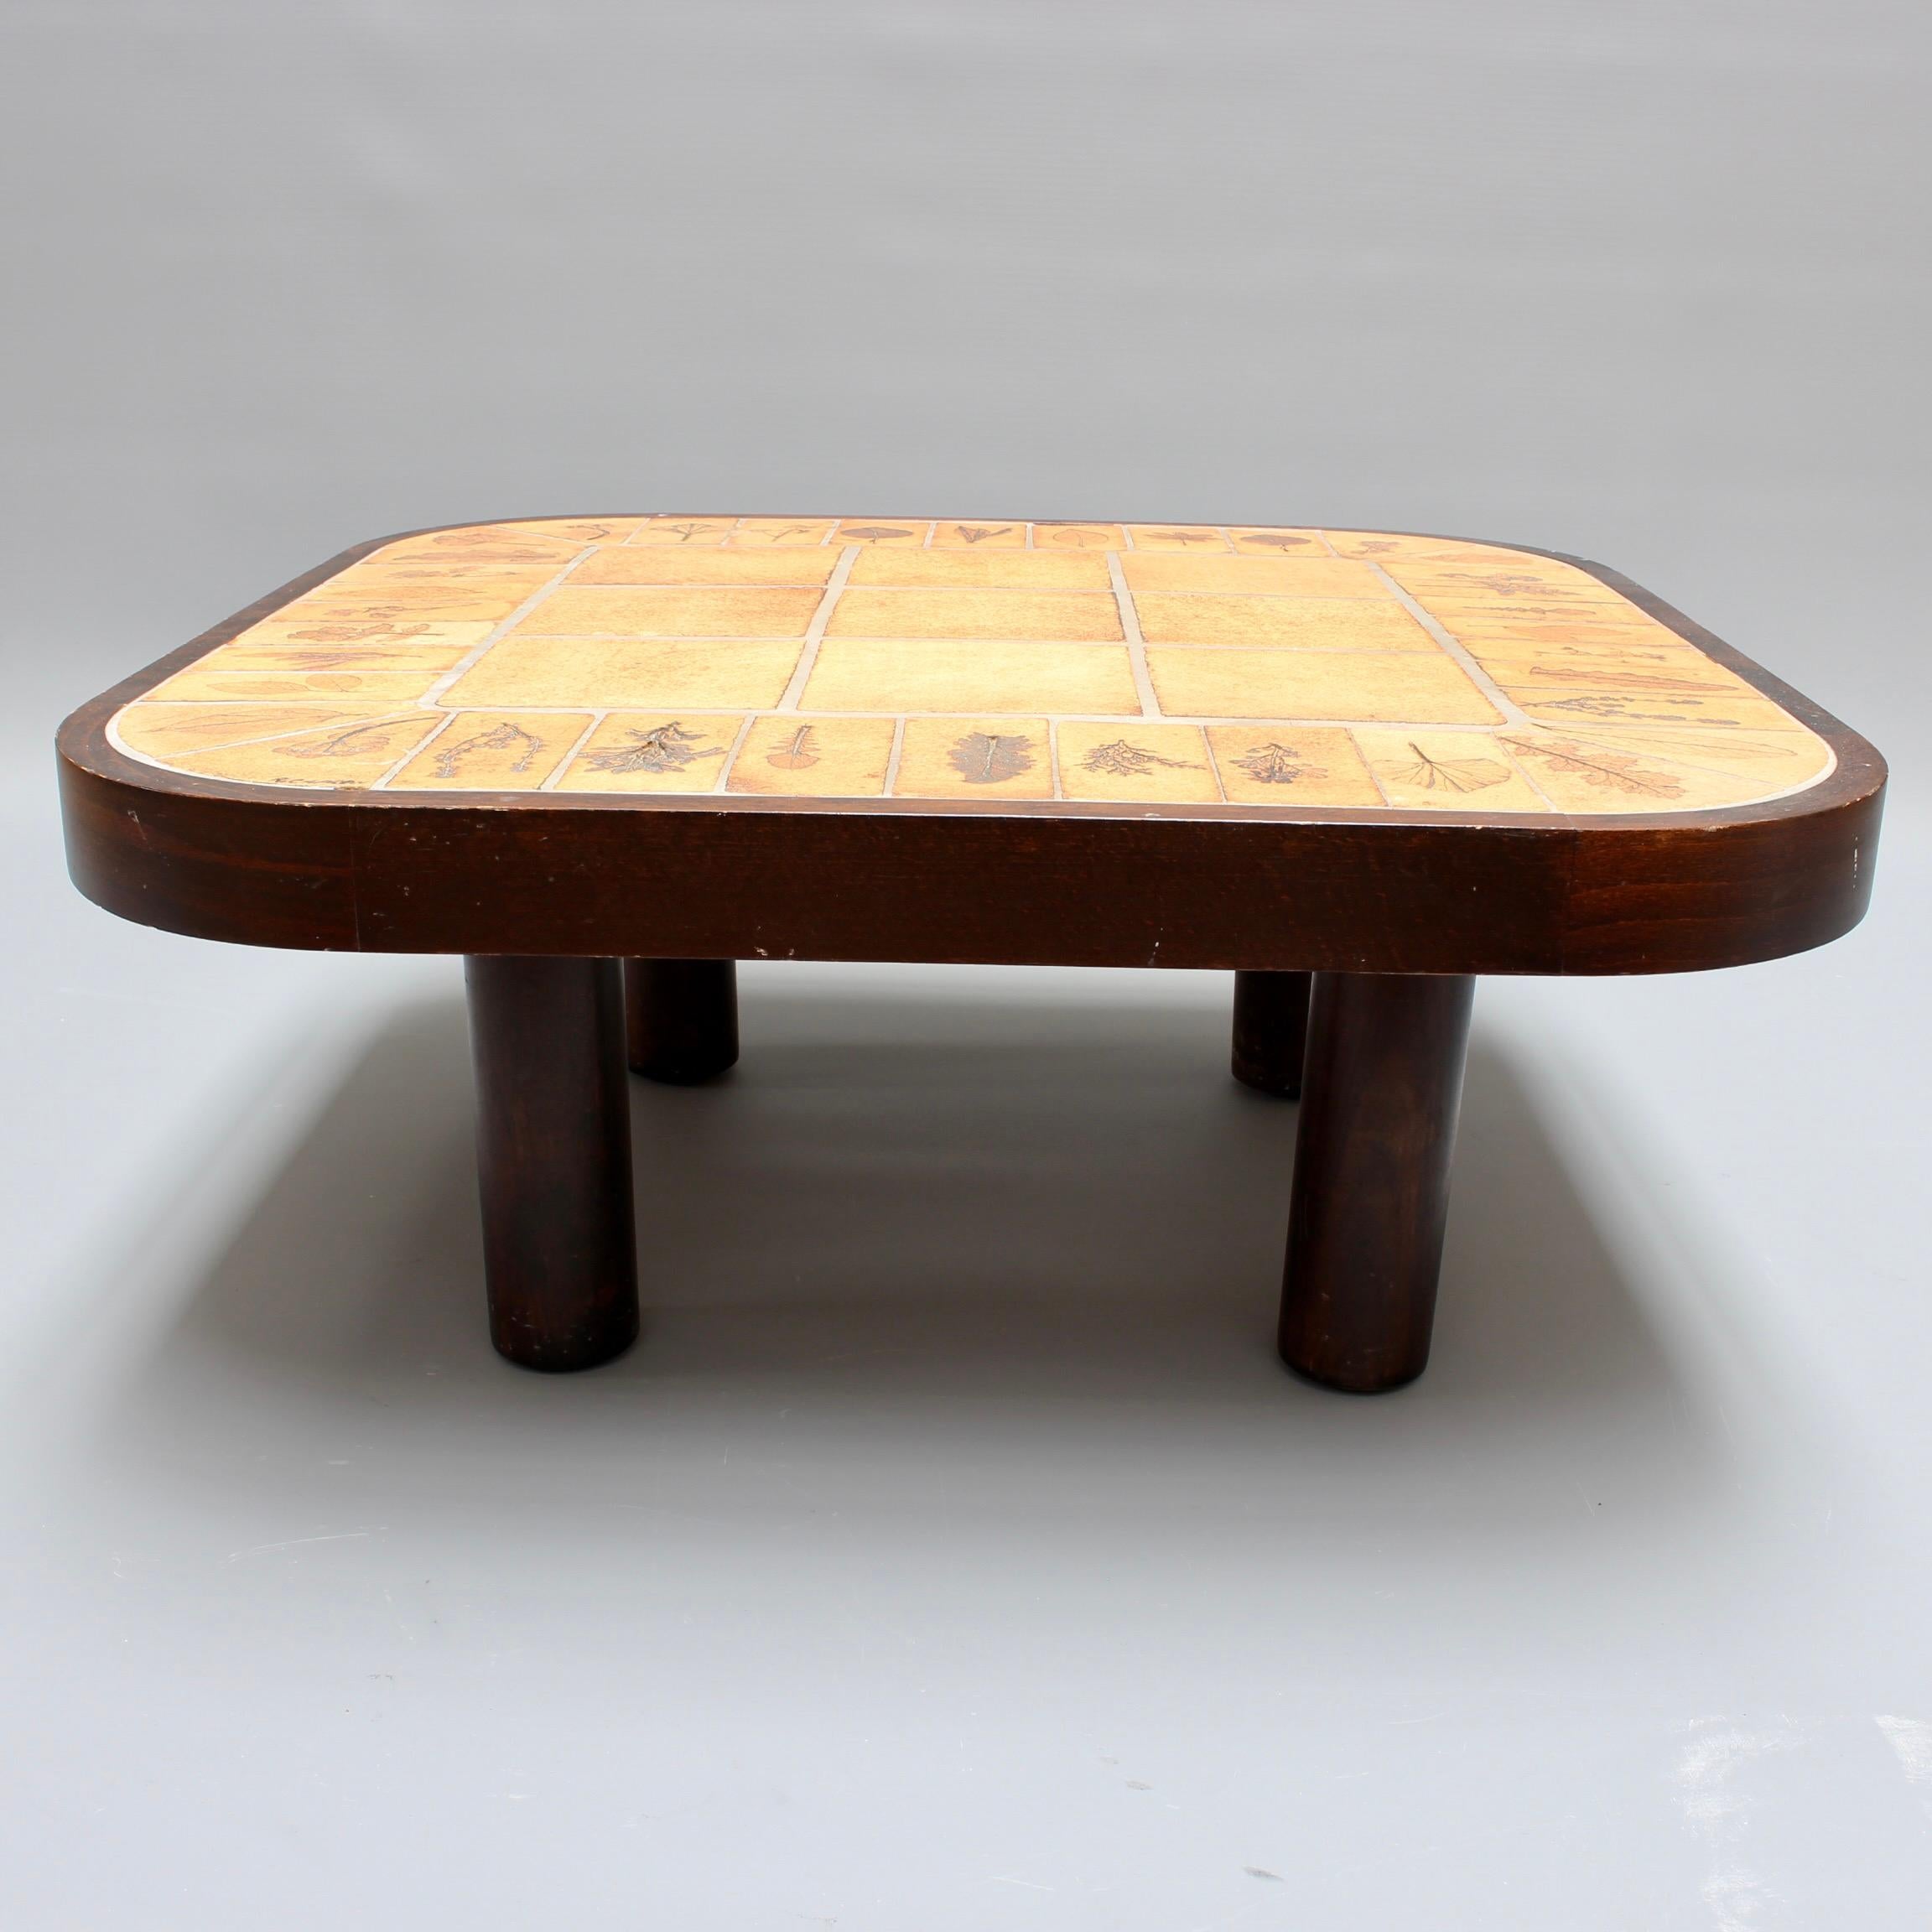 Late 20th Century Vintage French Rectangular Tiled Coffee Table by Roger Capron 'circa 1970s'